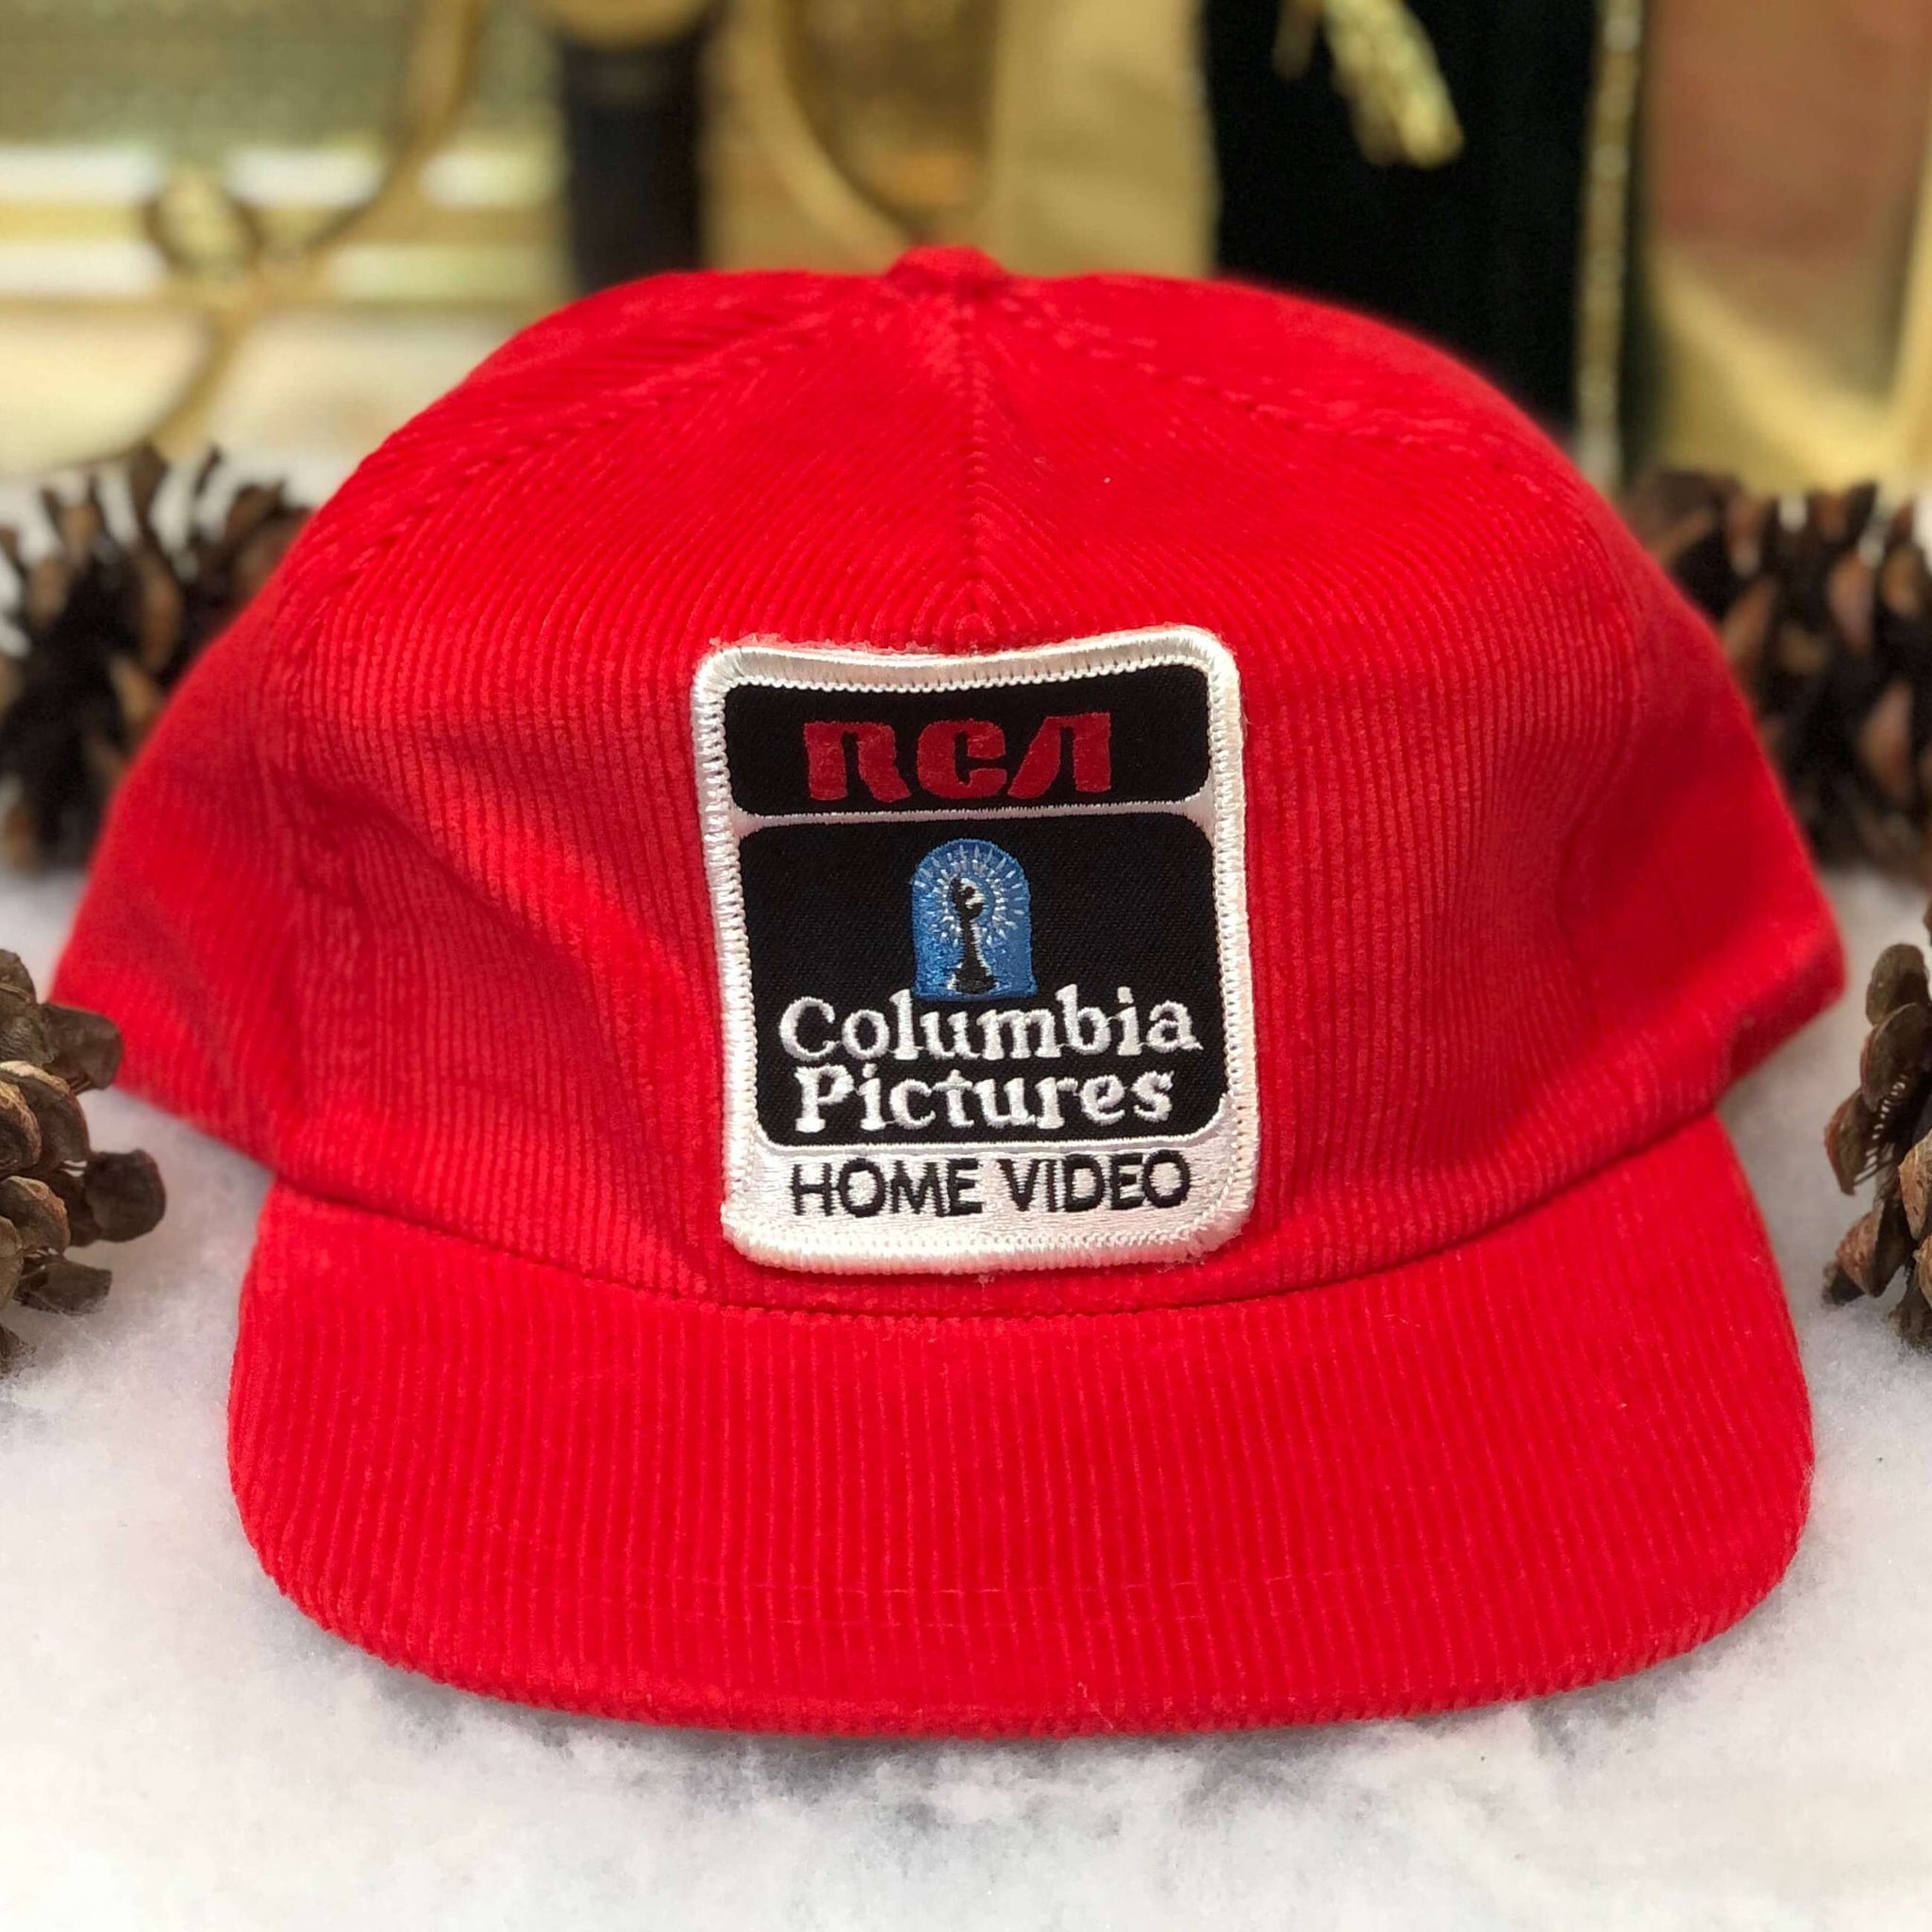 Vintage Deadstock NWOT RCA Columbia Pictures Home Video Corduroy Snapback Hat